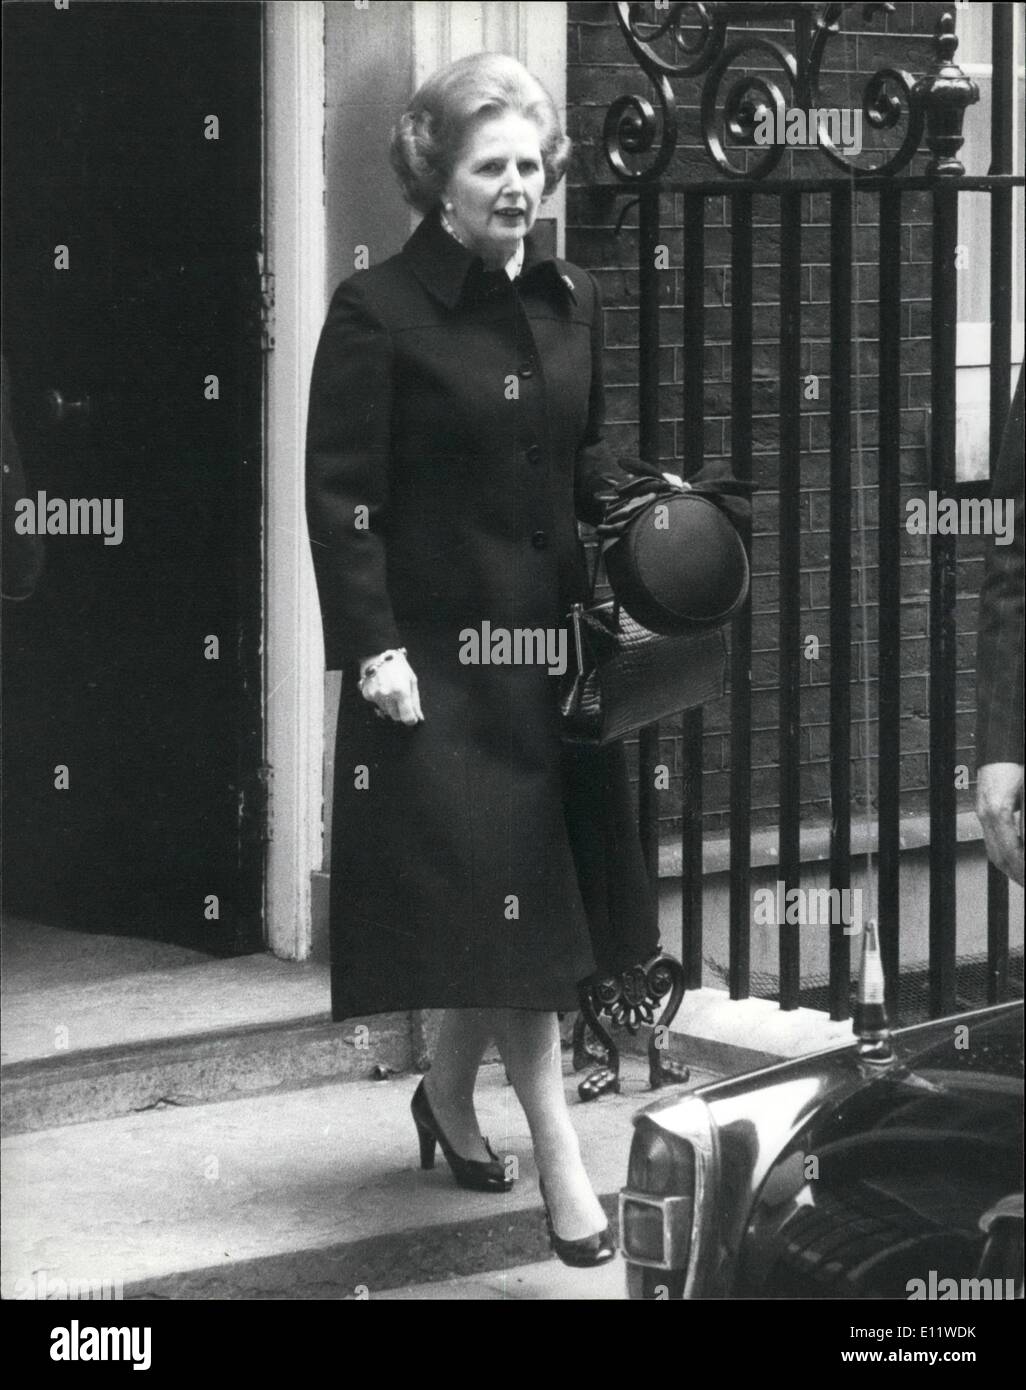 May 05, 1980 - Mrs Thatcher leaves for president Tito's funeral : Mrs Thatcher seen leaving no 10 this morning for London airport to fly to Belgrade to attend the funeral of president Tito which takes place- tomorrow. Stock Photo